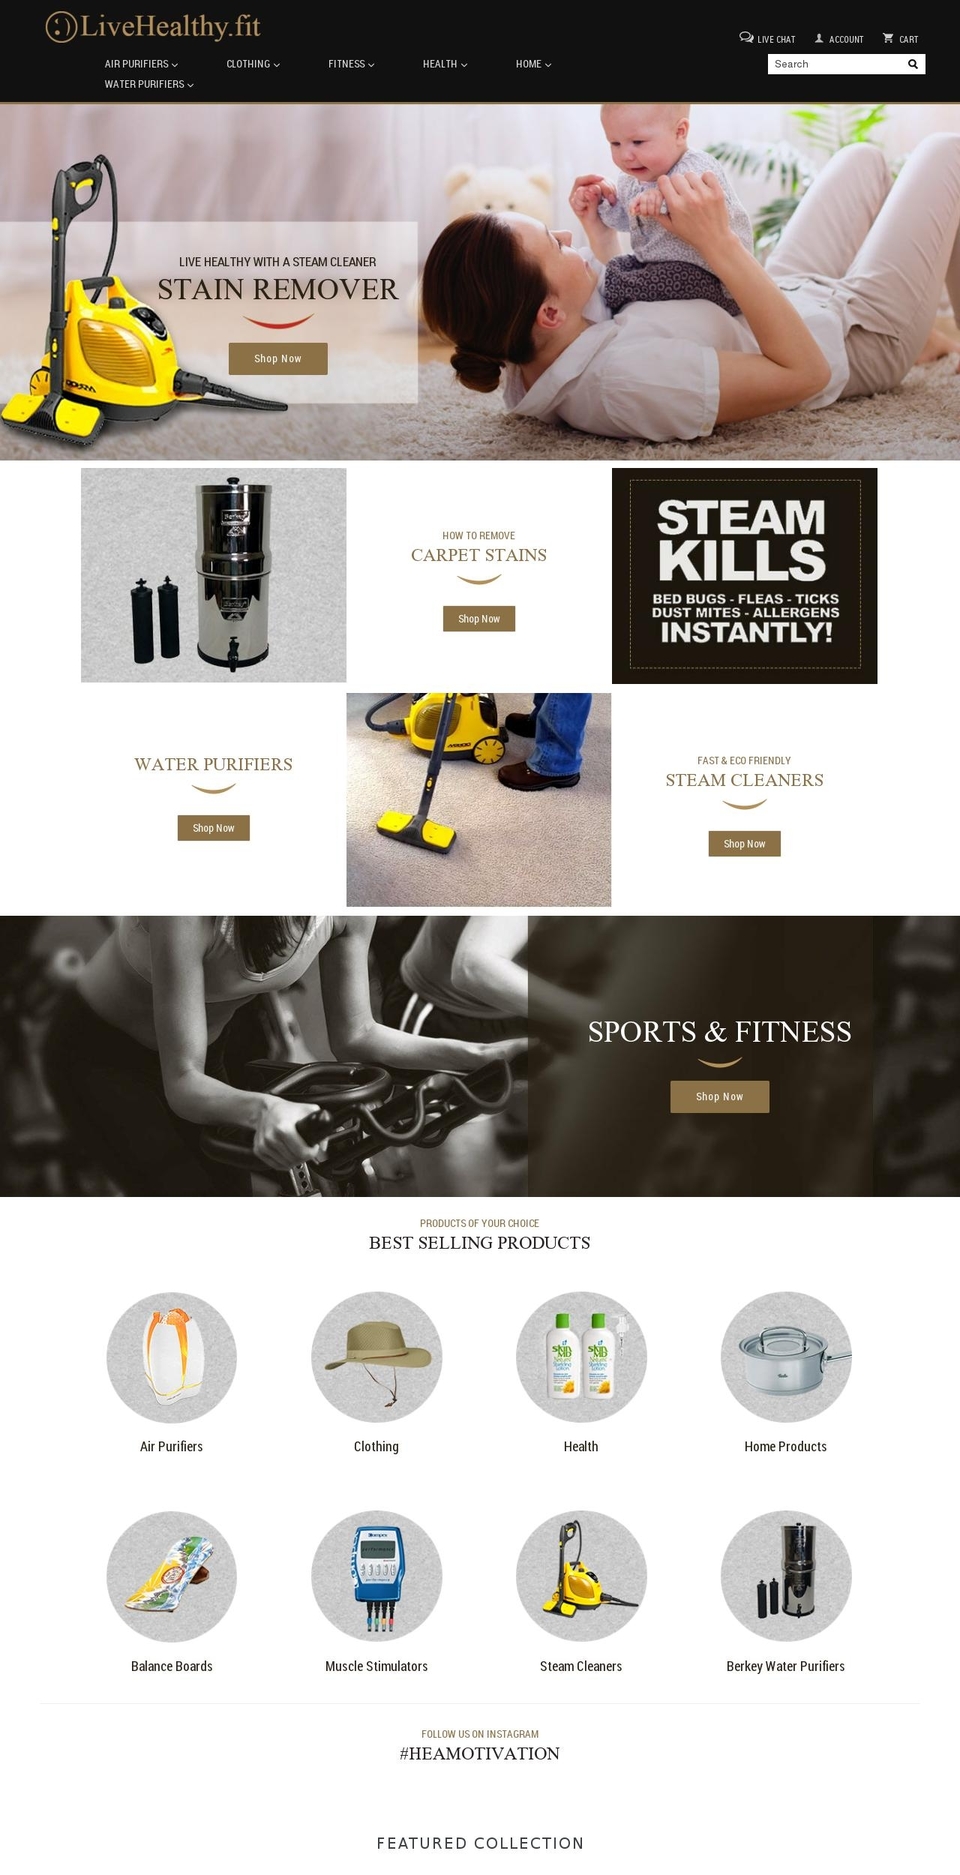 livehealthy.fit shopify website screenshot